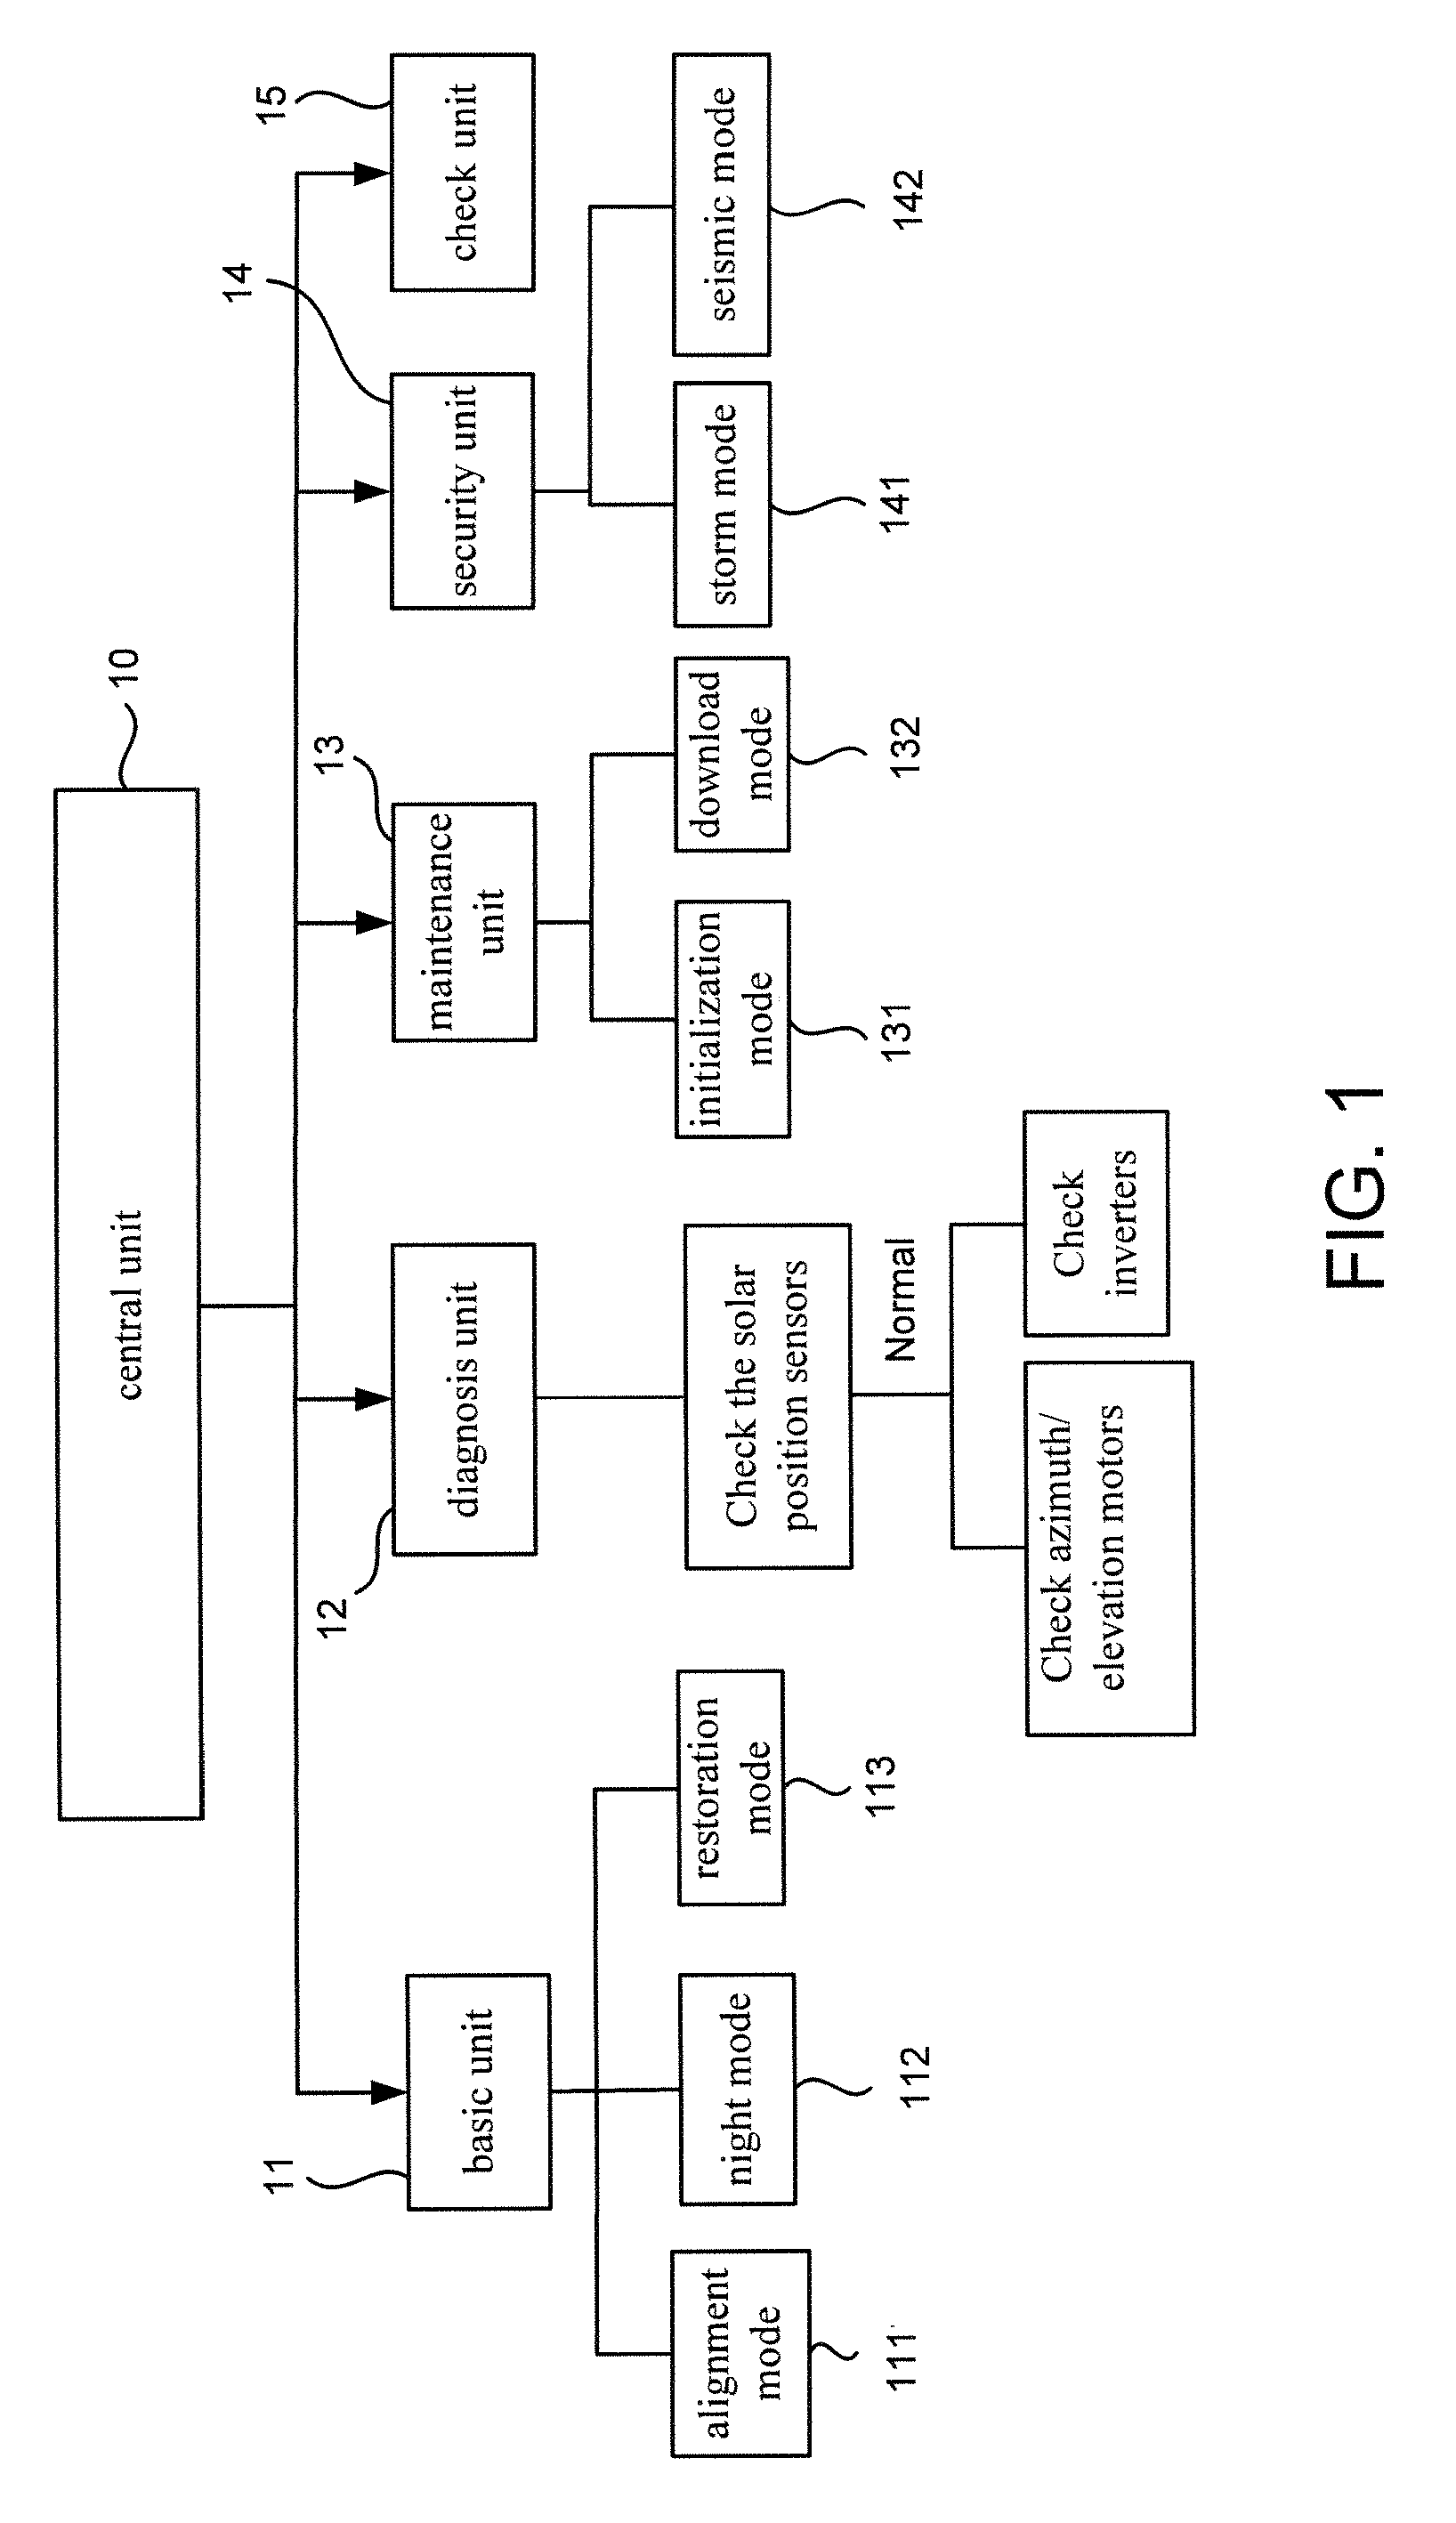 Controlling apparatus for a concentration photovoltaic system